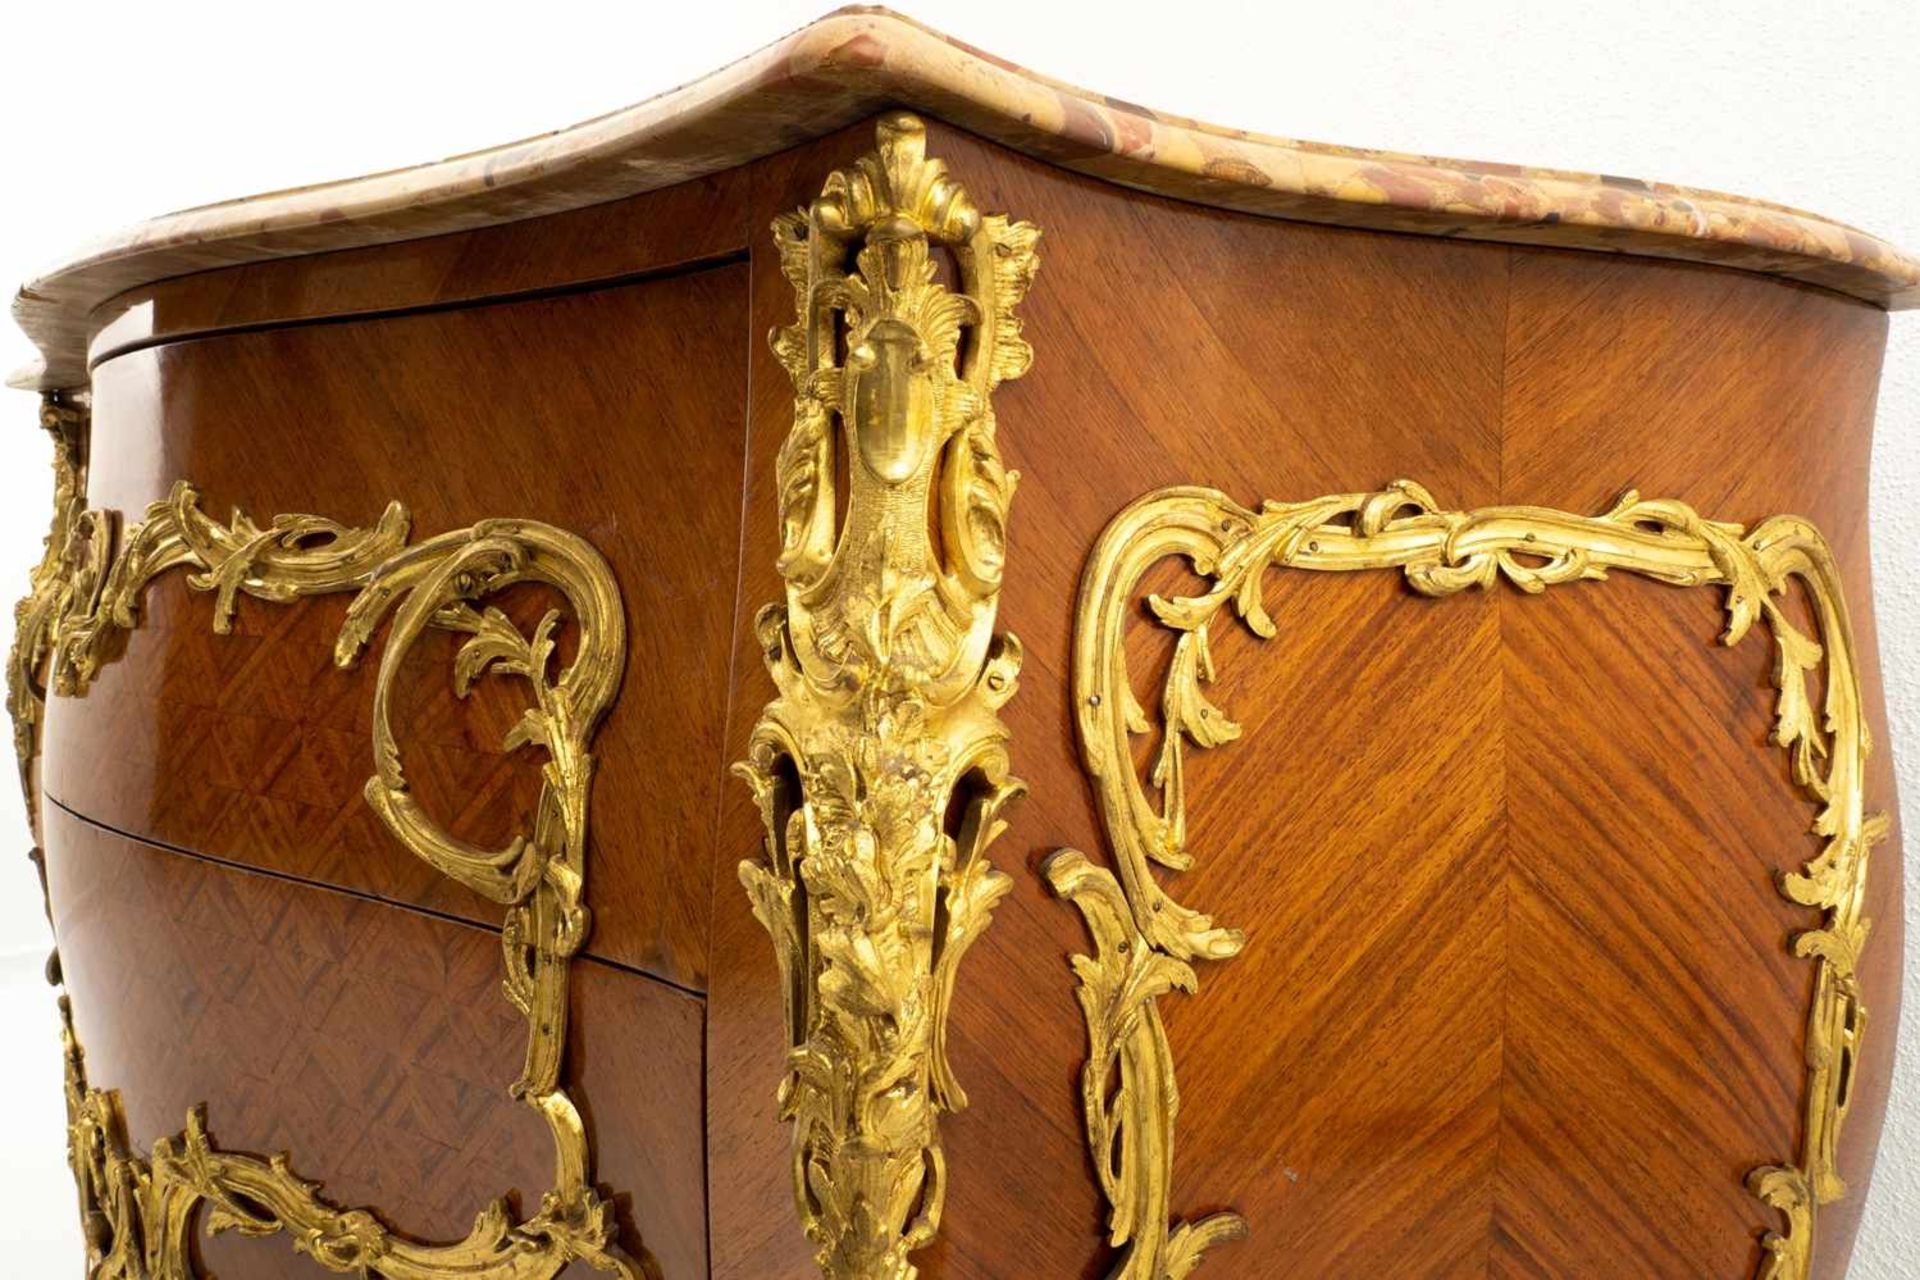 Bulging ornate chest of drawers with bronze appliqué< - Image 6 of 8